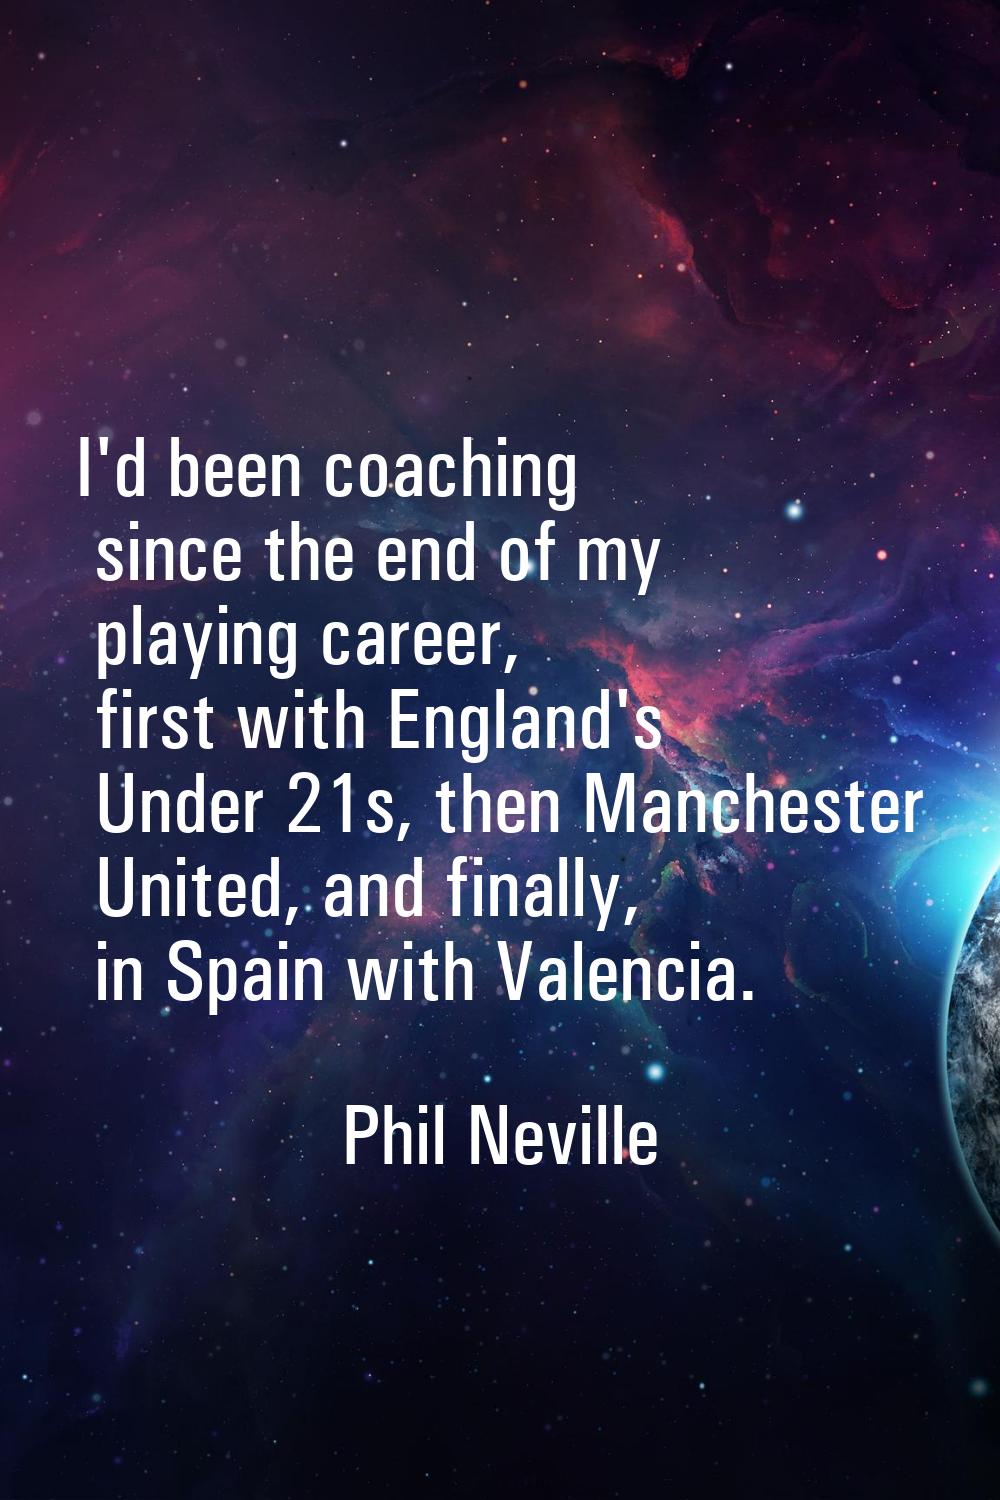 I'd been coaching since the end of my playing career, first with England's Under 21s, then Manchest